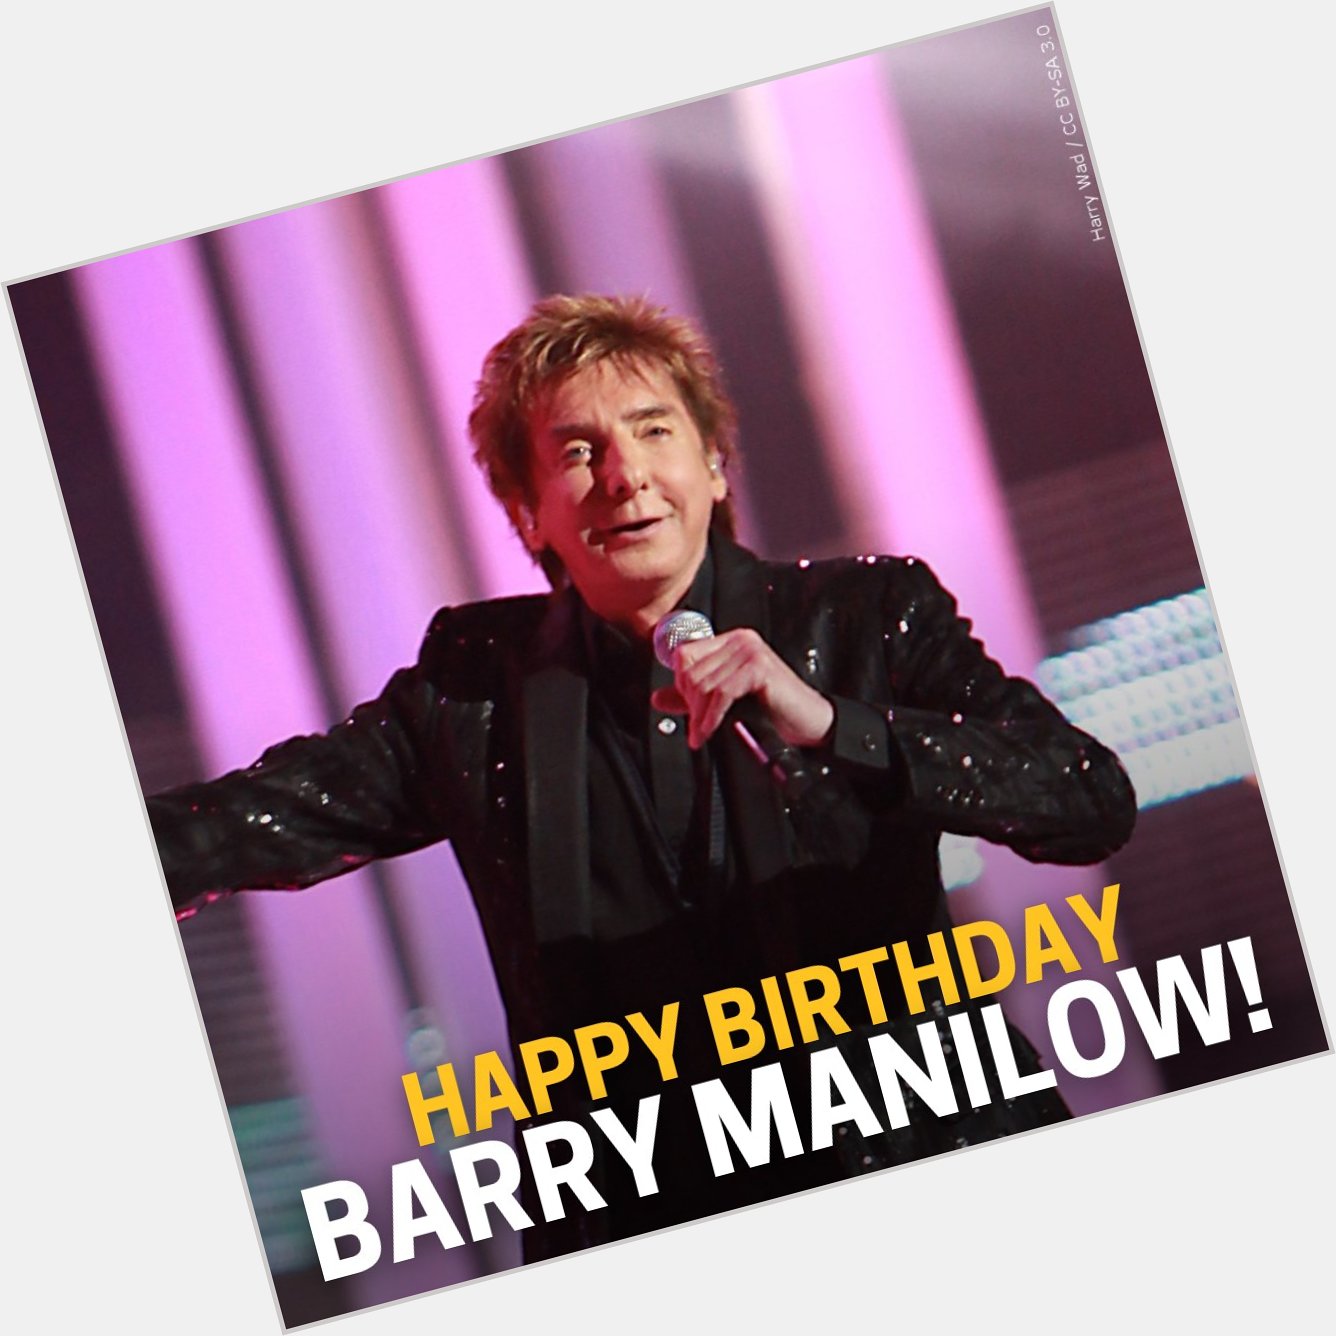 Happy birthday, Barry Manilow! He\s turning 8  0  today! 